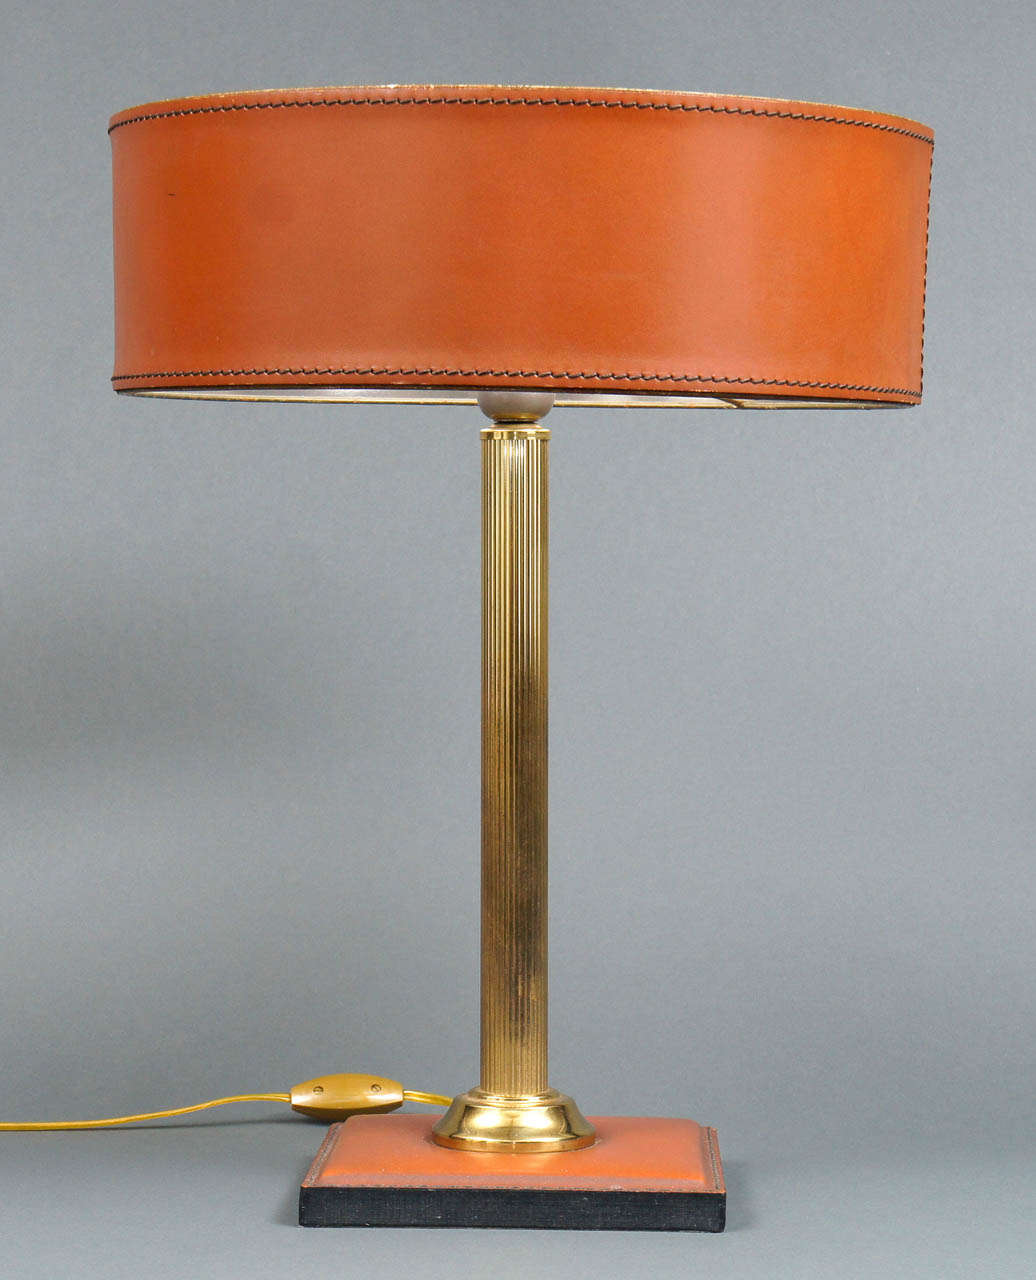 Leather and Brass Table Lamp with Leather Shade
14